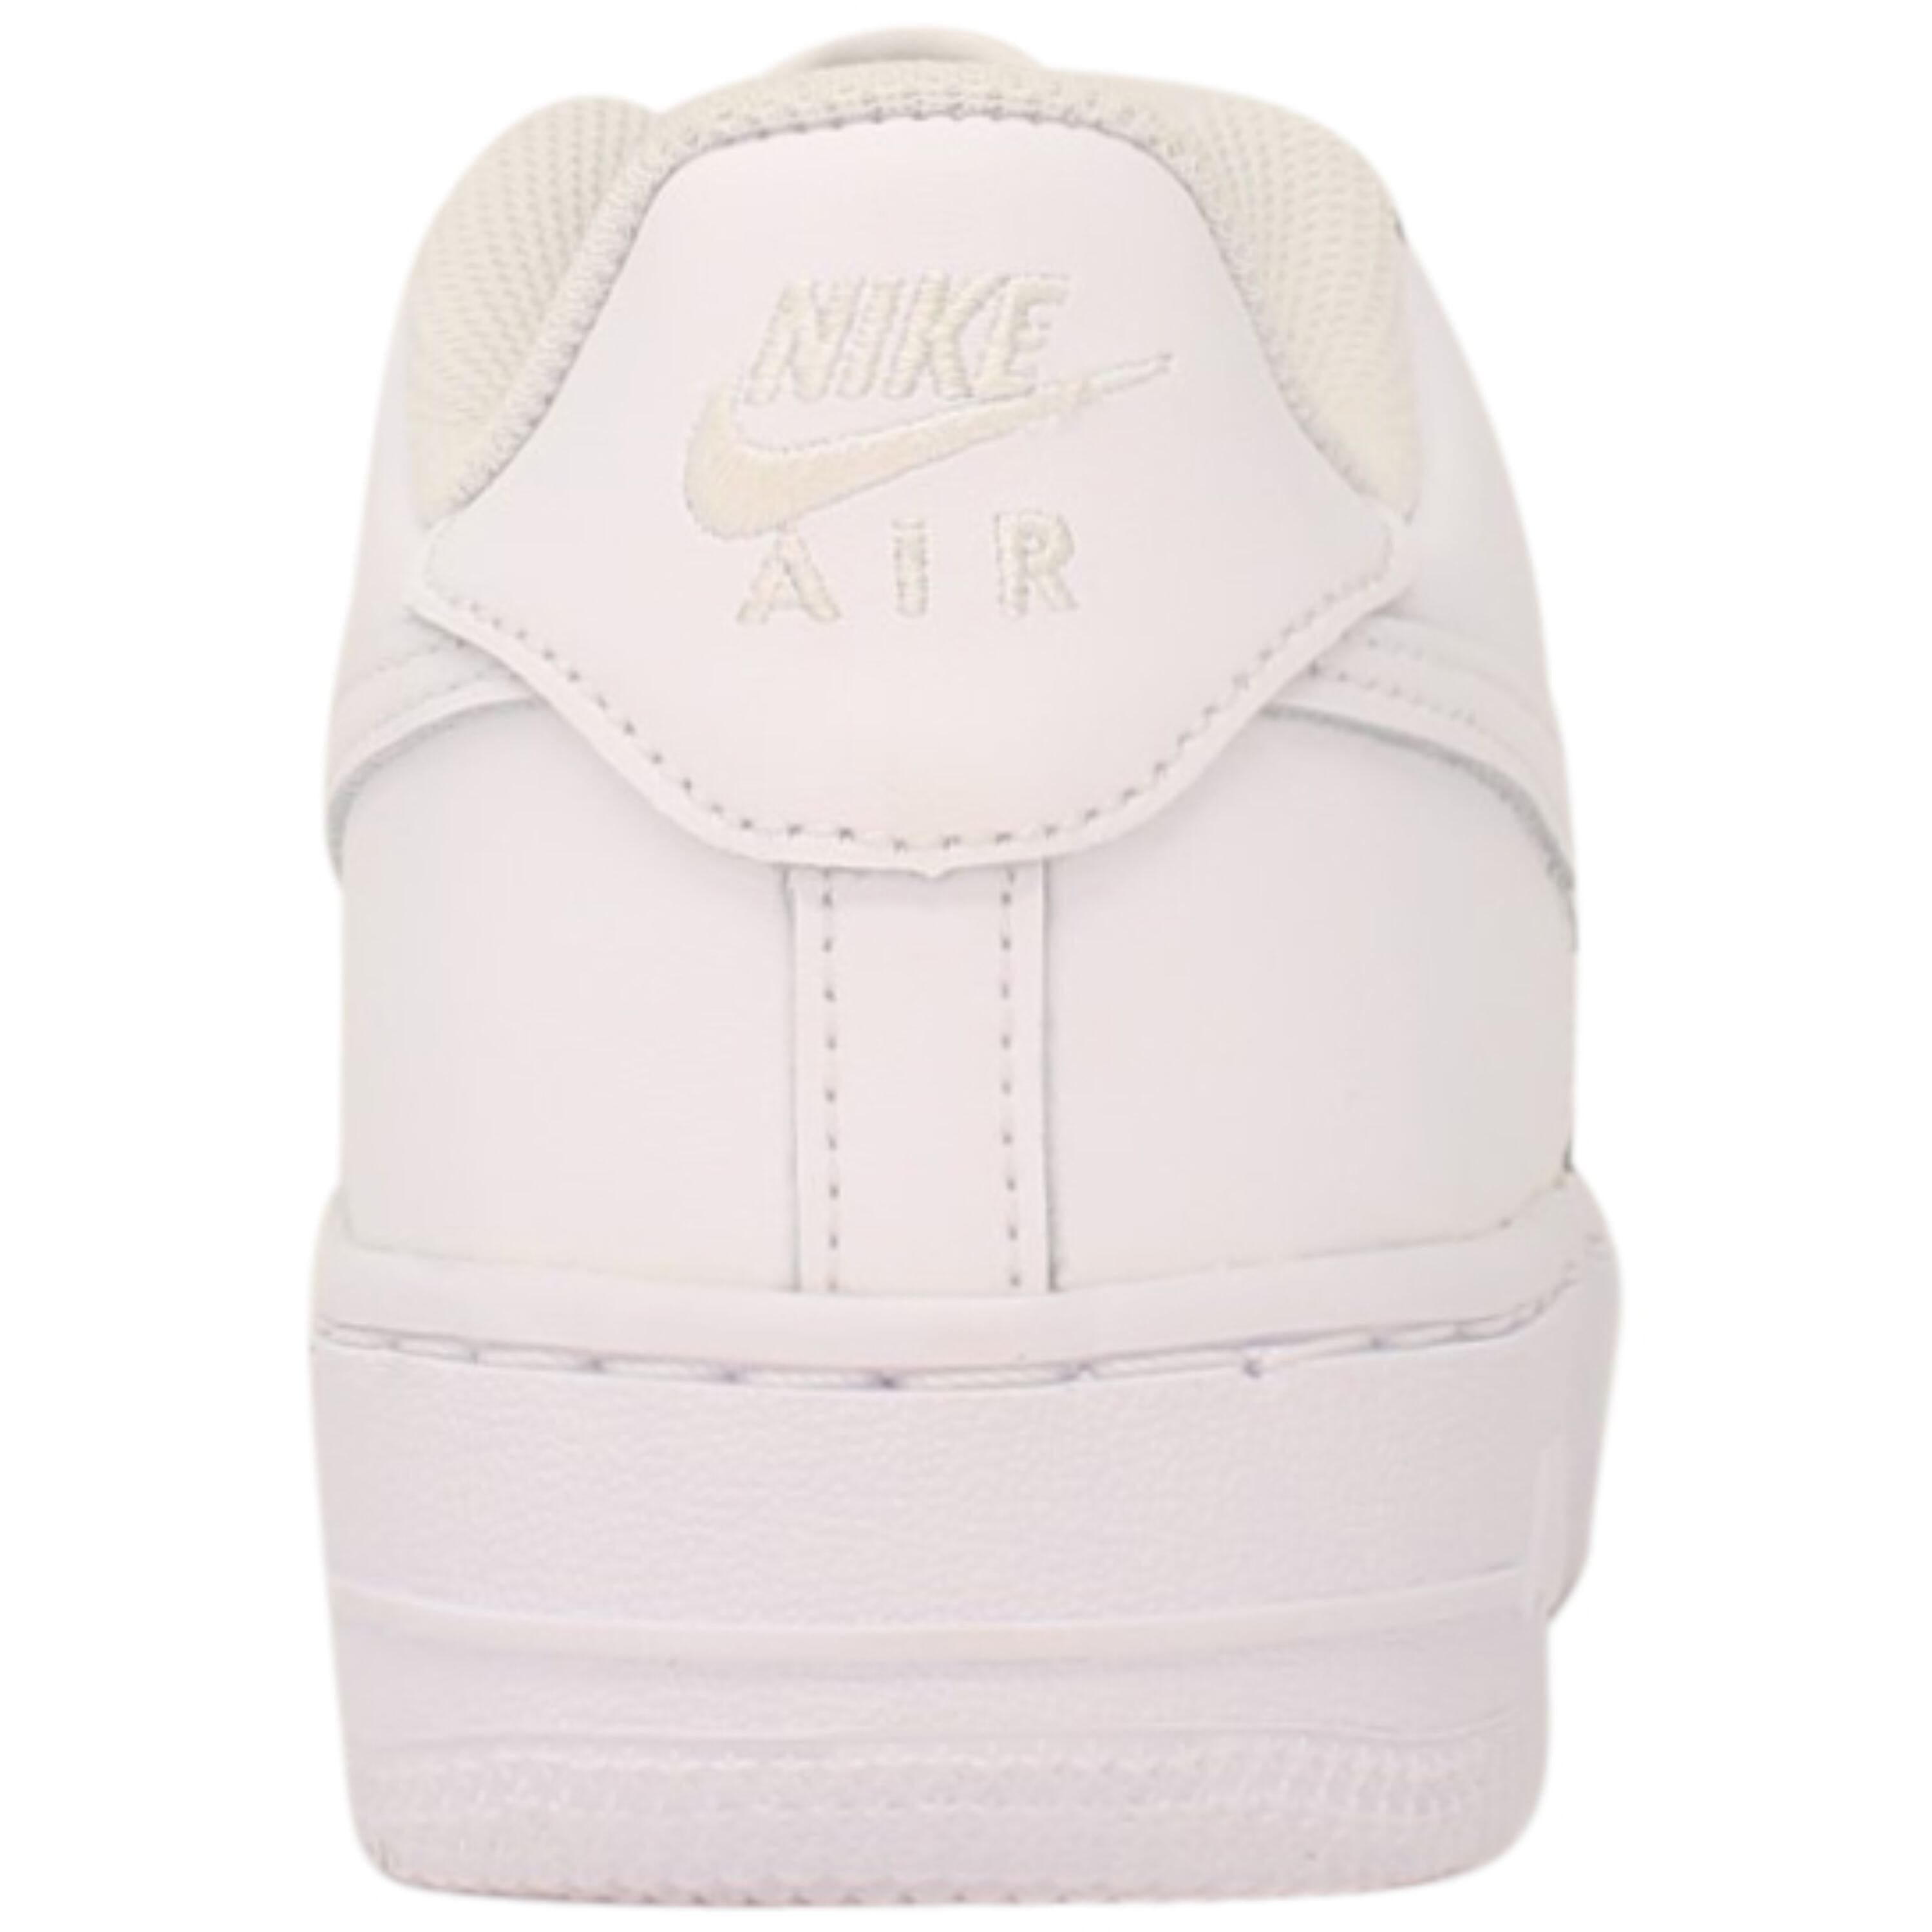 Nike Air Force 1 LE White/White DH2920-111 Grade-School Size 5Y